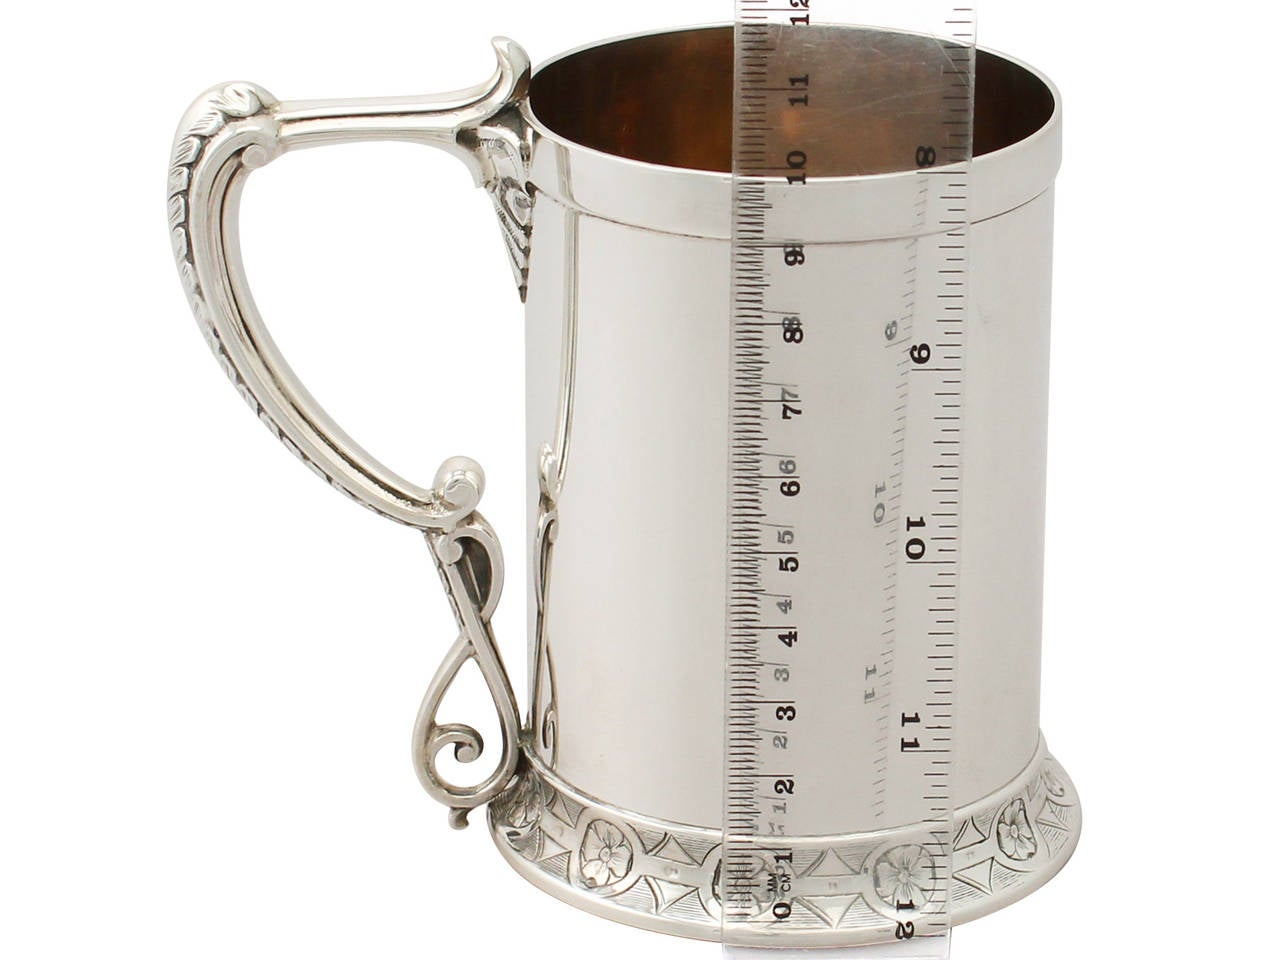 A fine and impressive antique English Victorian sterling silver christening mug; part of our silver christening collection.

This impressive antique Victorian sterling silver christening mug has a subtly tapering cylindrical form to a spreading